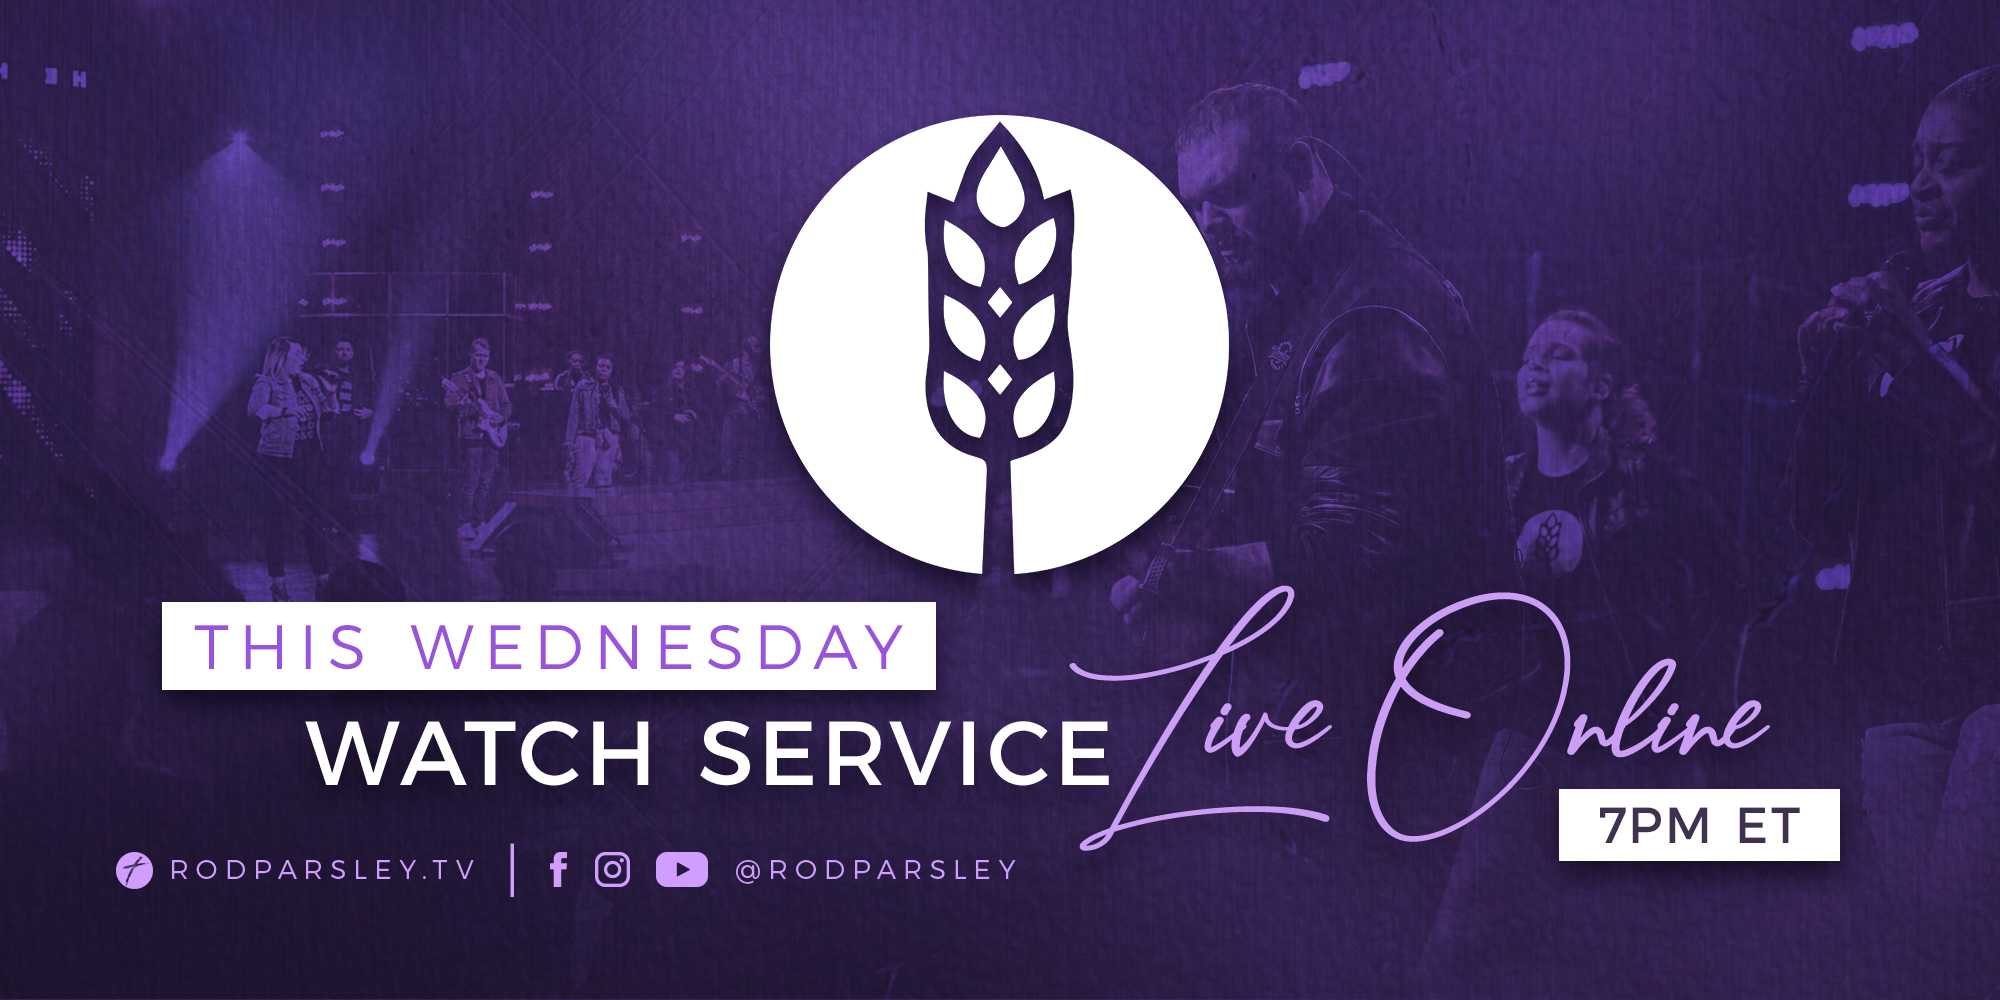 This Wednesday Watch Service Live Online 7PM ET